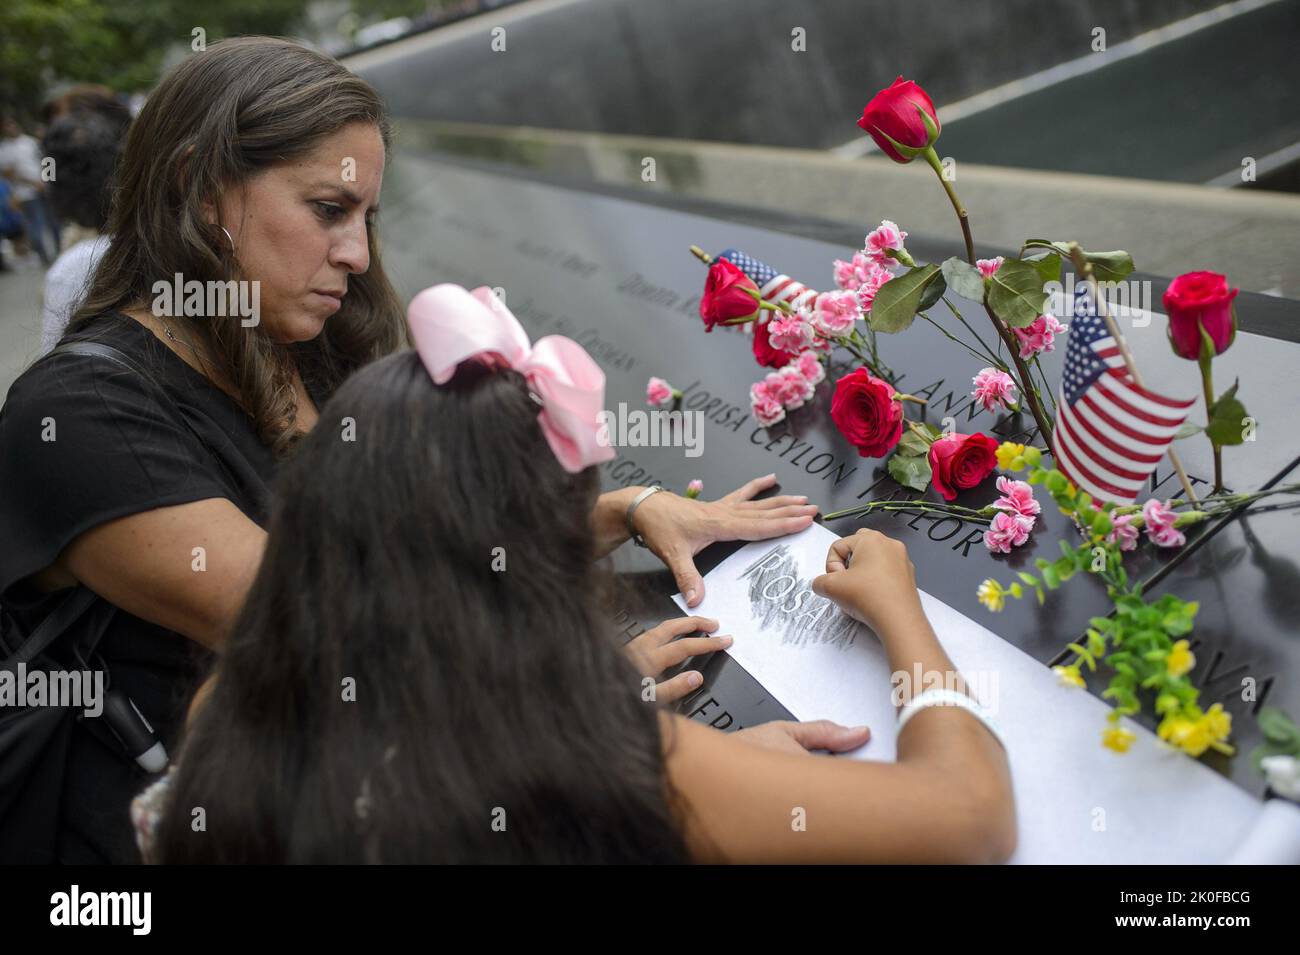 New York, United States. 11th Sep, 2022. Family of Rosa Maria Feliciano, who died in the North Tower during the September 11 attacks on the World Trade Center, etch her name onto paper on the 21st anniversary of the attacks in New York City on Sunday, September 11, 2022. Photo by Bonnie Cash/UPI Credit: UPI/Alamy Live News Stock Photo